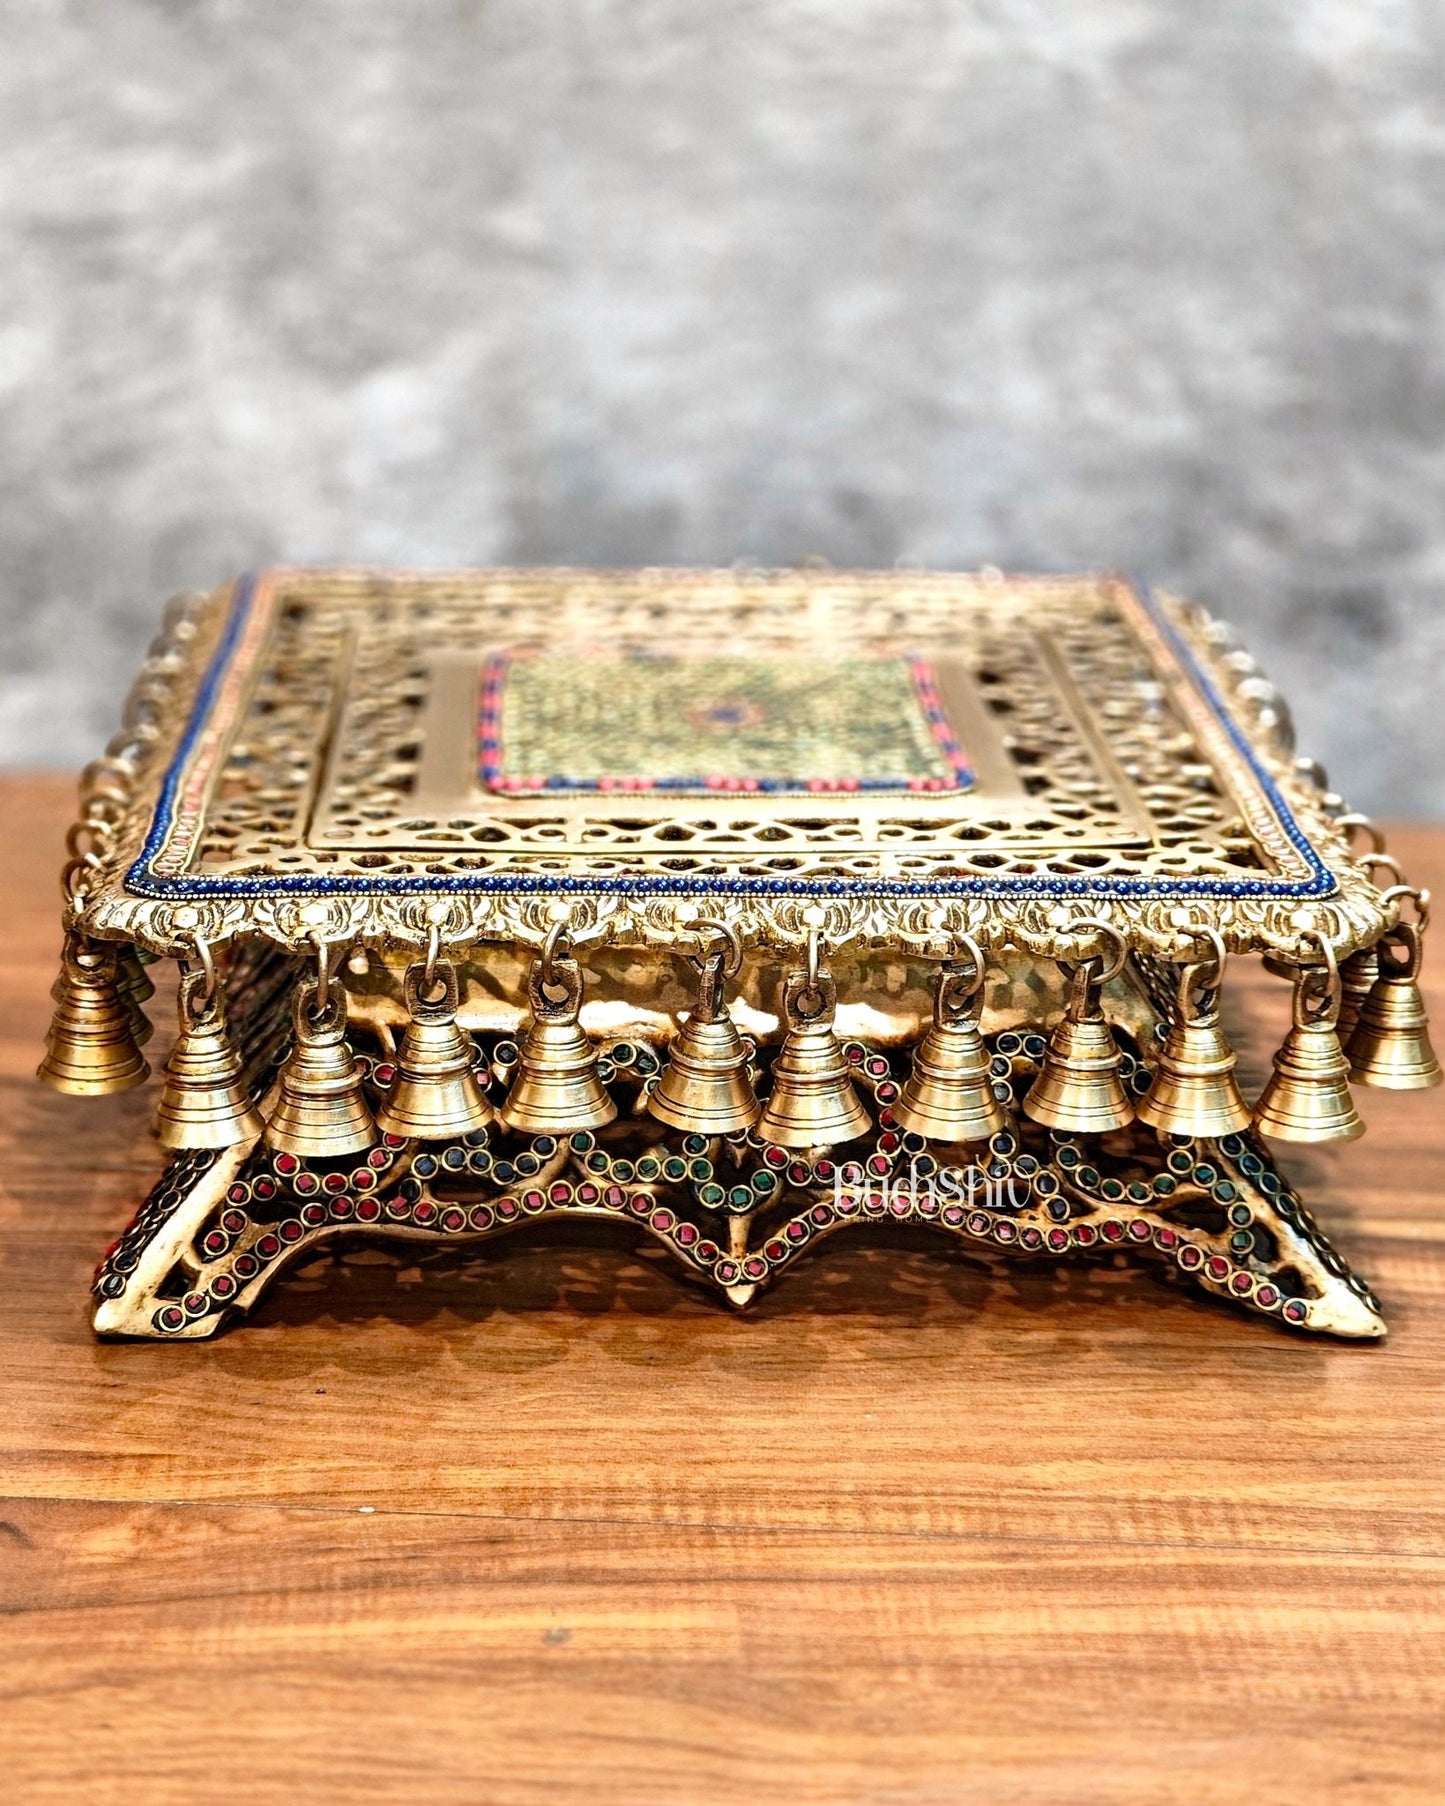 Handcrafted Pure Brass Pooja Chowki/Stand/Stool for Idols large - Budhshiv.com